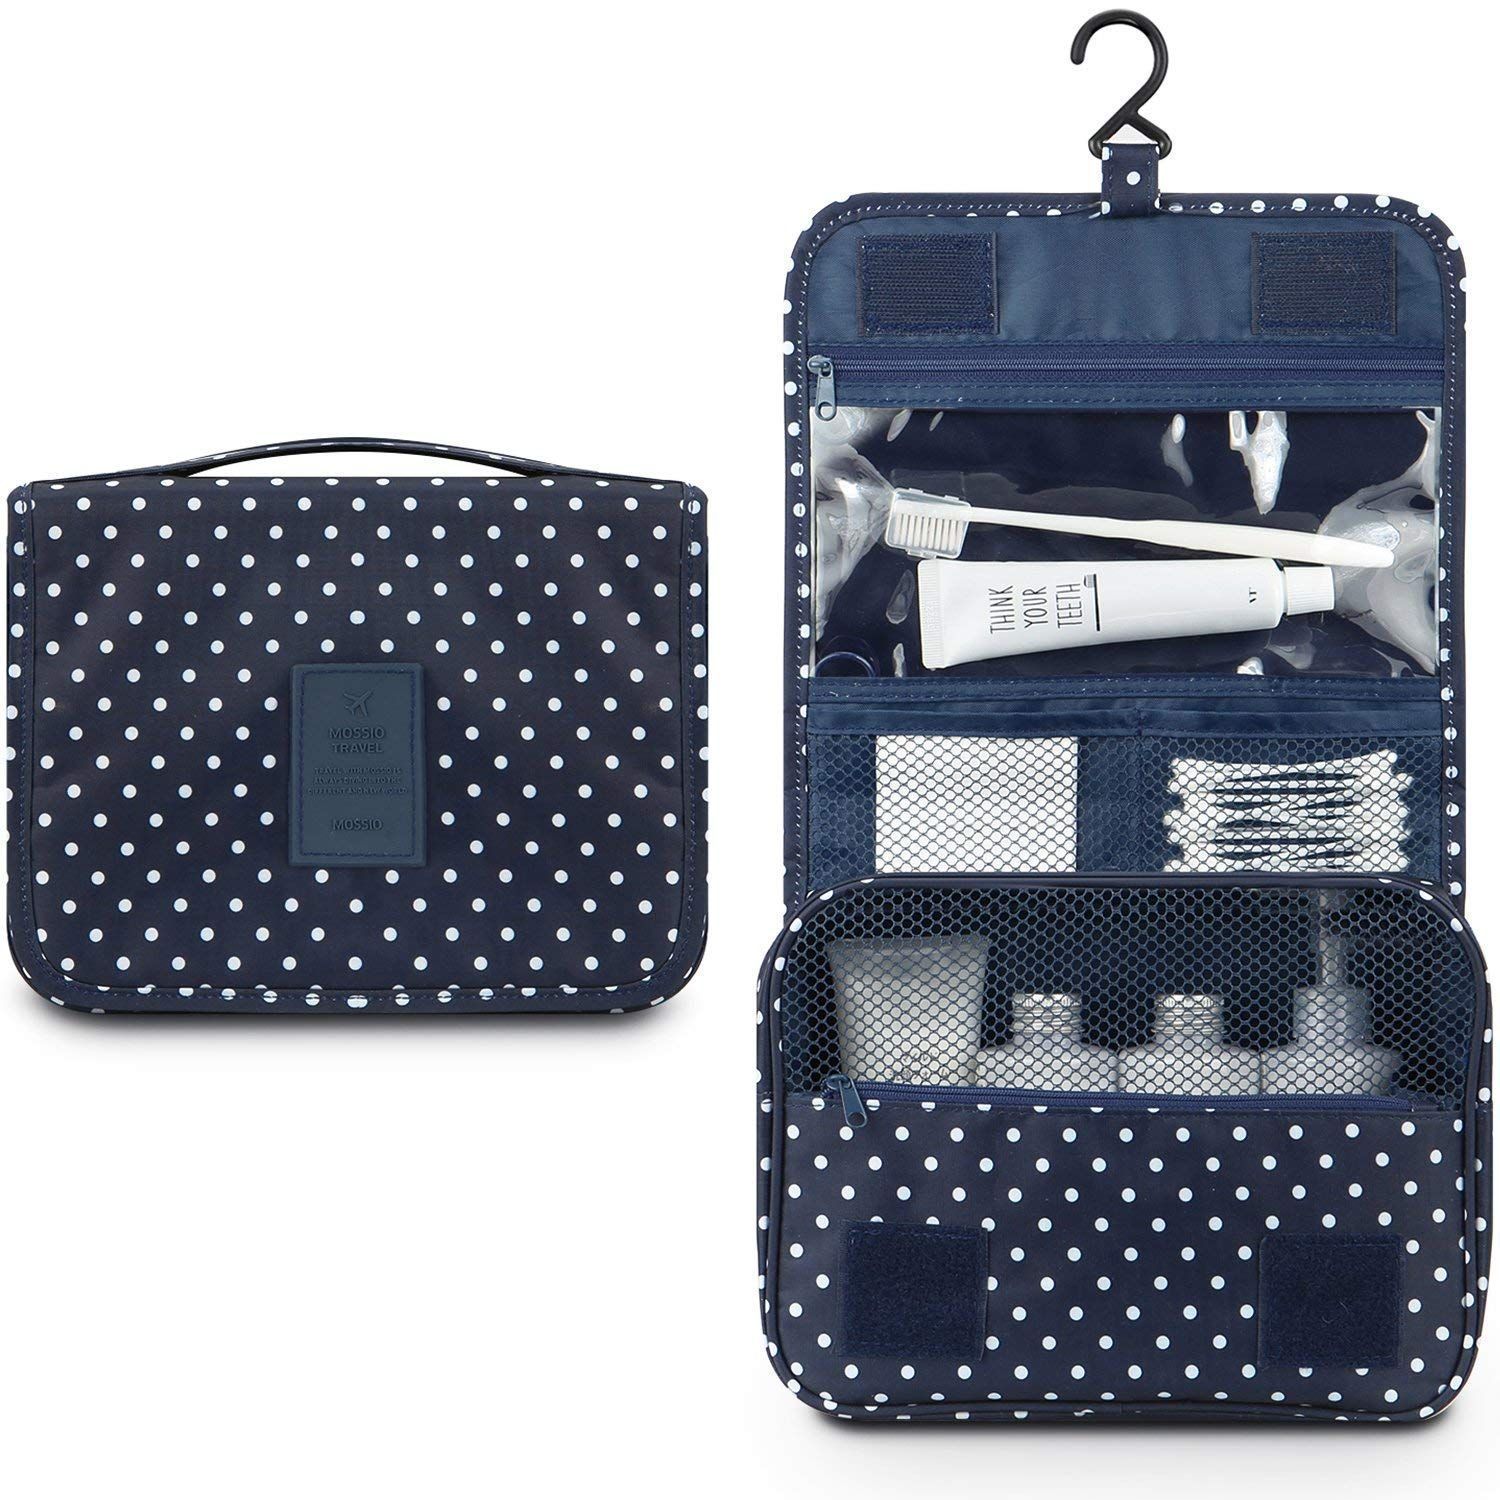 Toiletry Bags and Dopp Kits for Men: Top Choices - HubPages